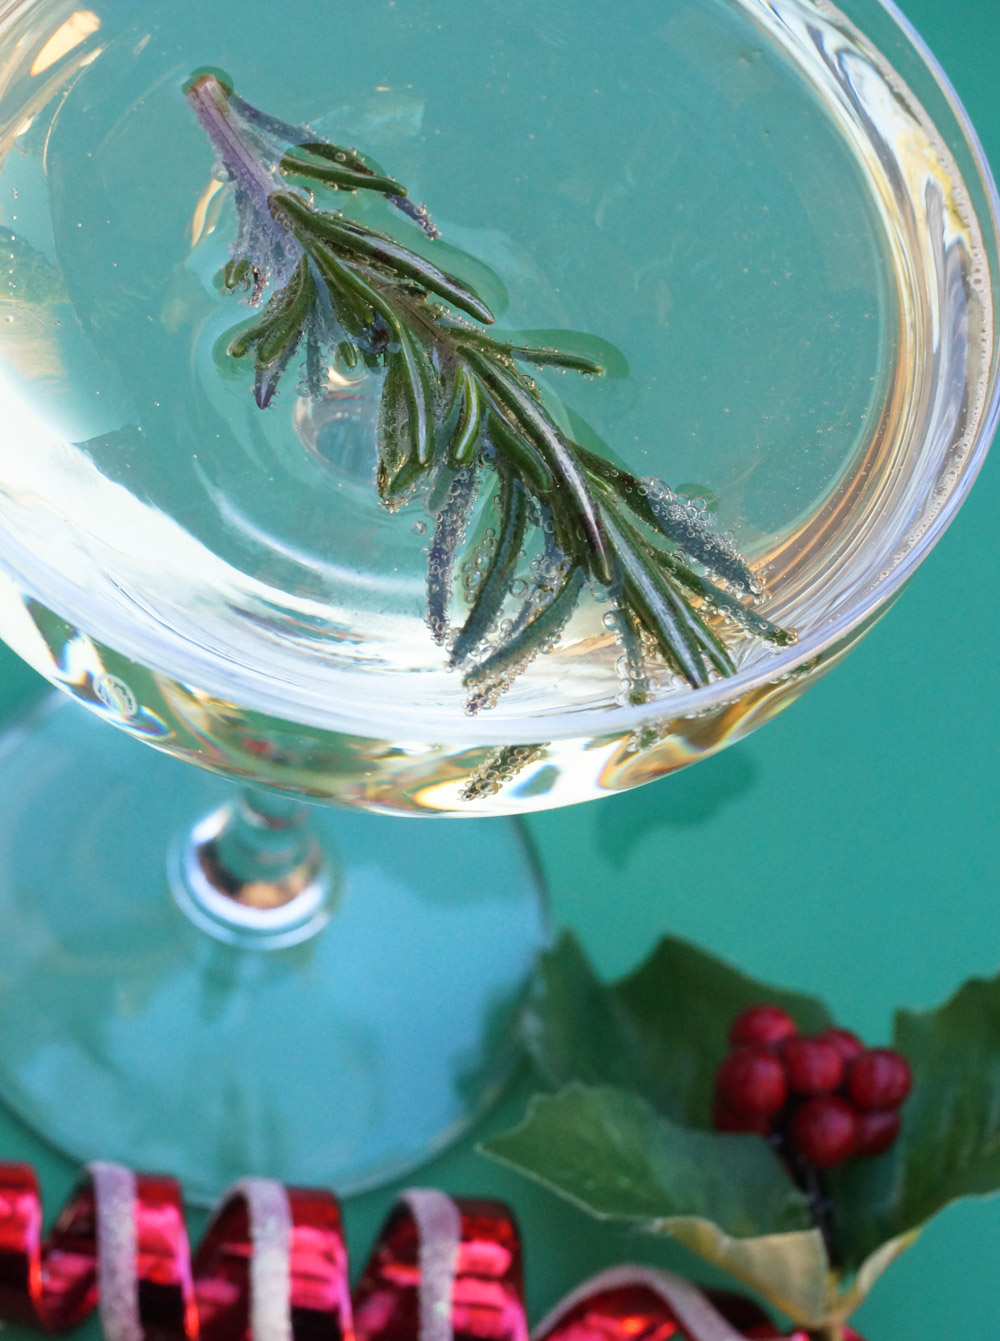 Rosemary-adds-a-festive-holiday-touch-to-cocktails